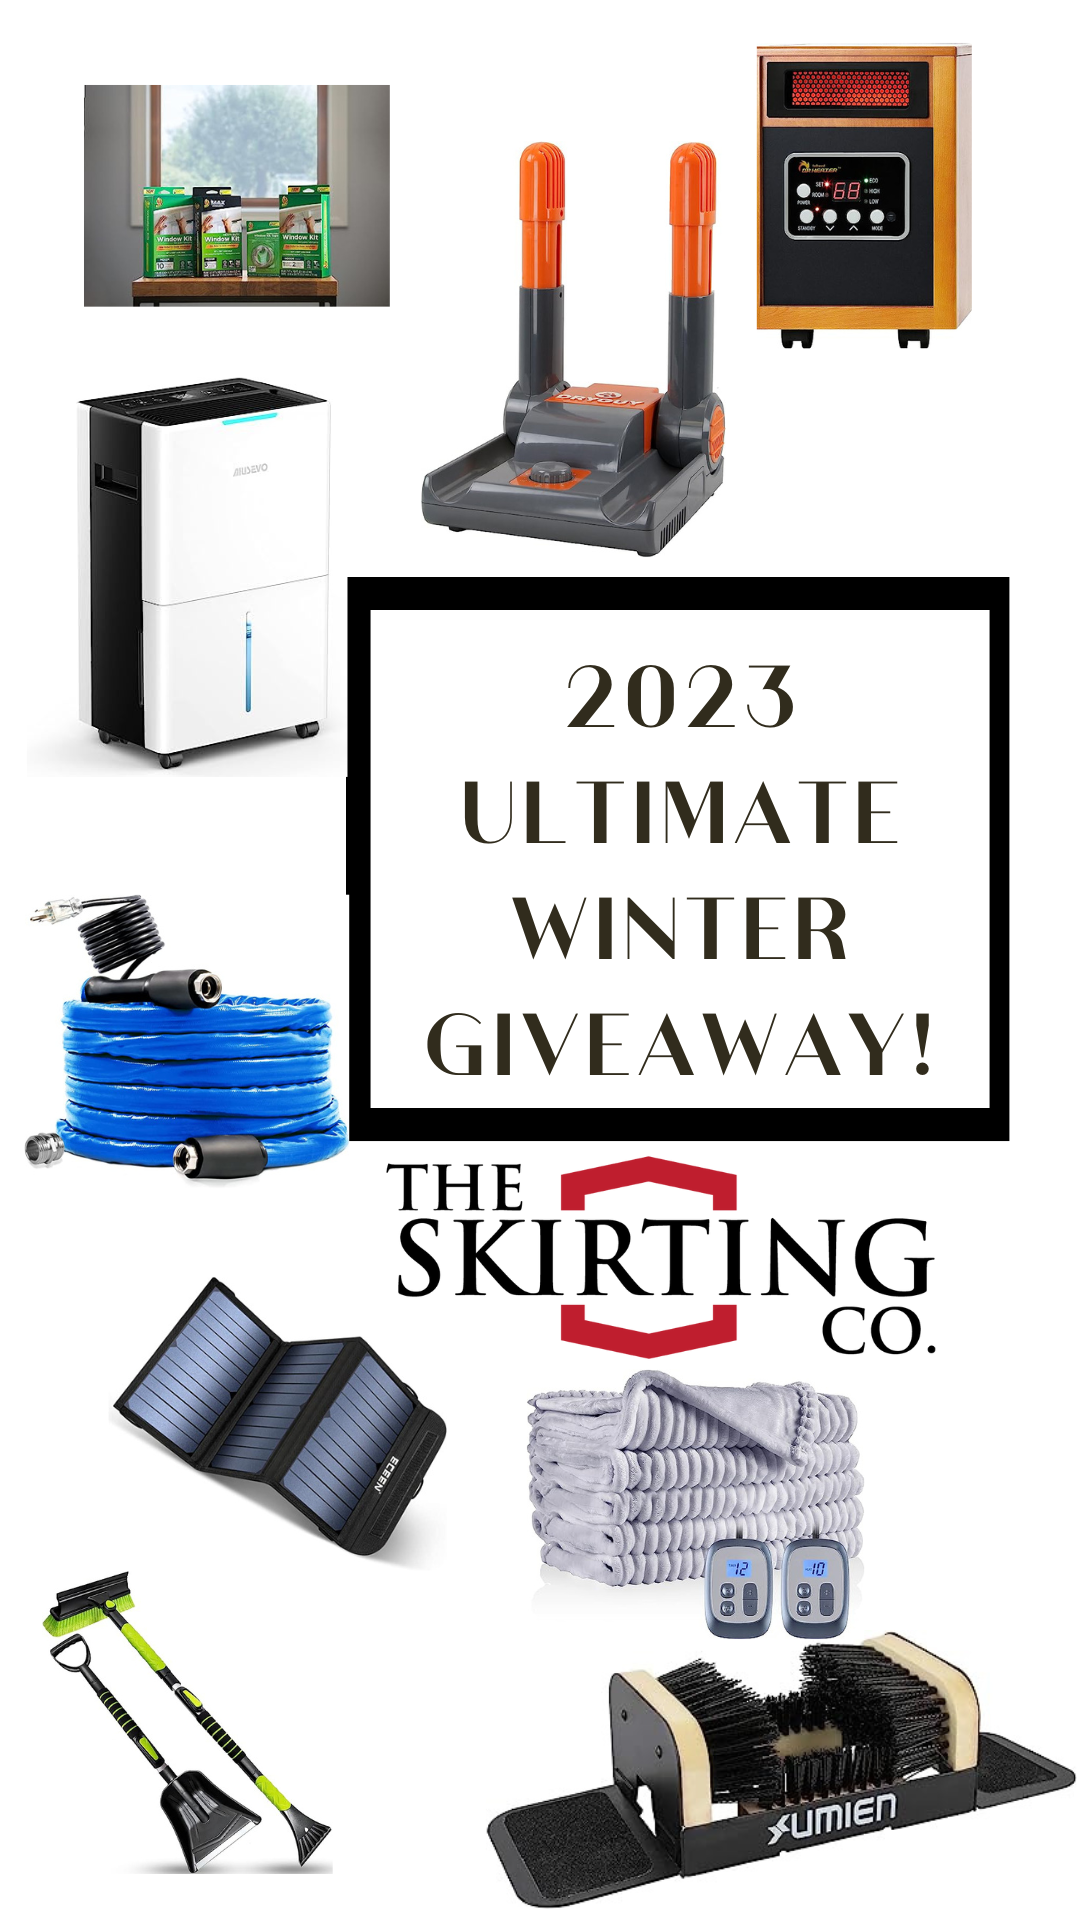 2023 Ultimate Winter Package Giveaway